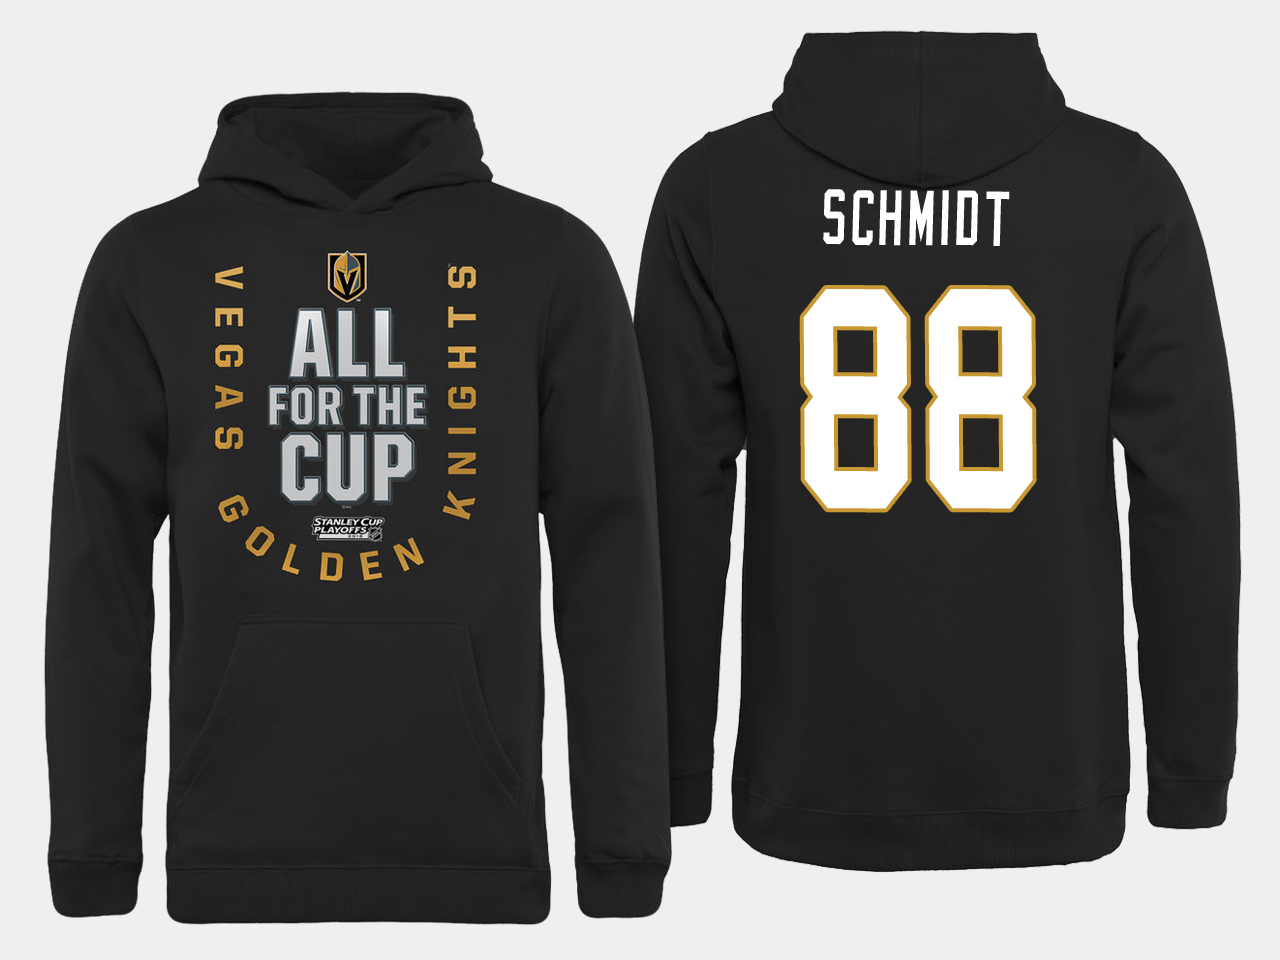 Men NHL Vegas Golden Knights #88 Schmidt All for the Cup hoodie->more nhl jerseys->NHL Jersey